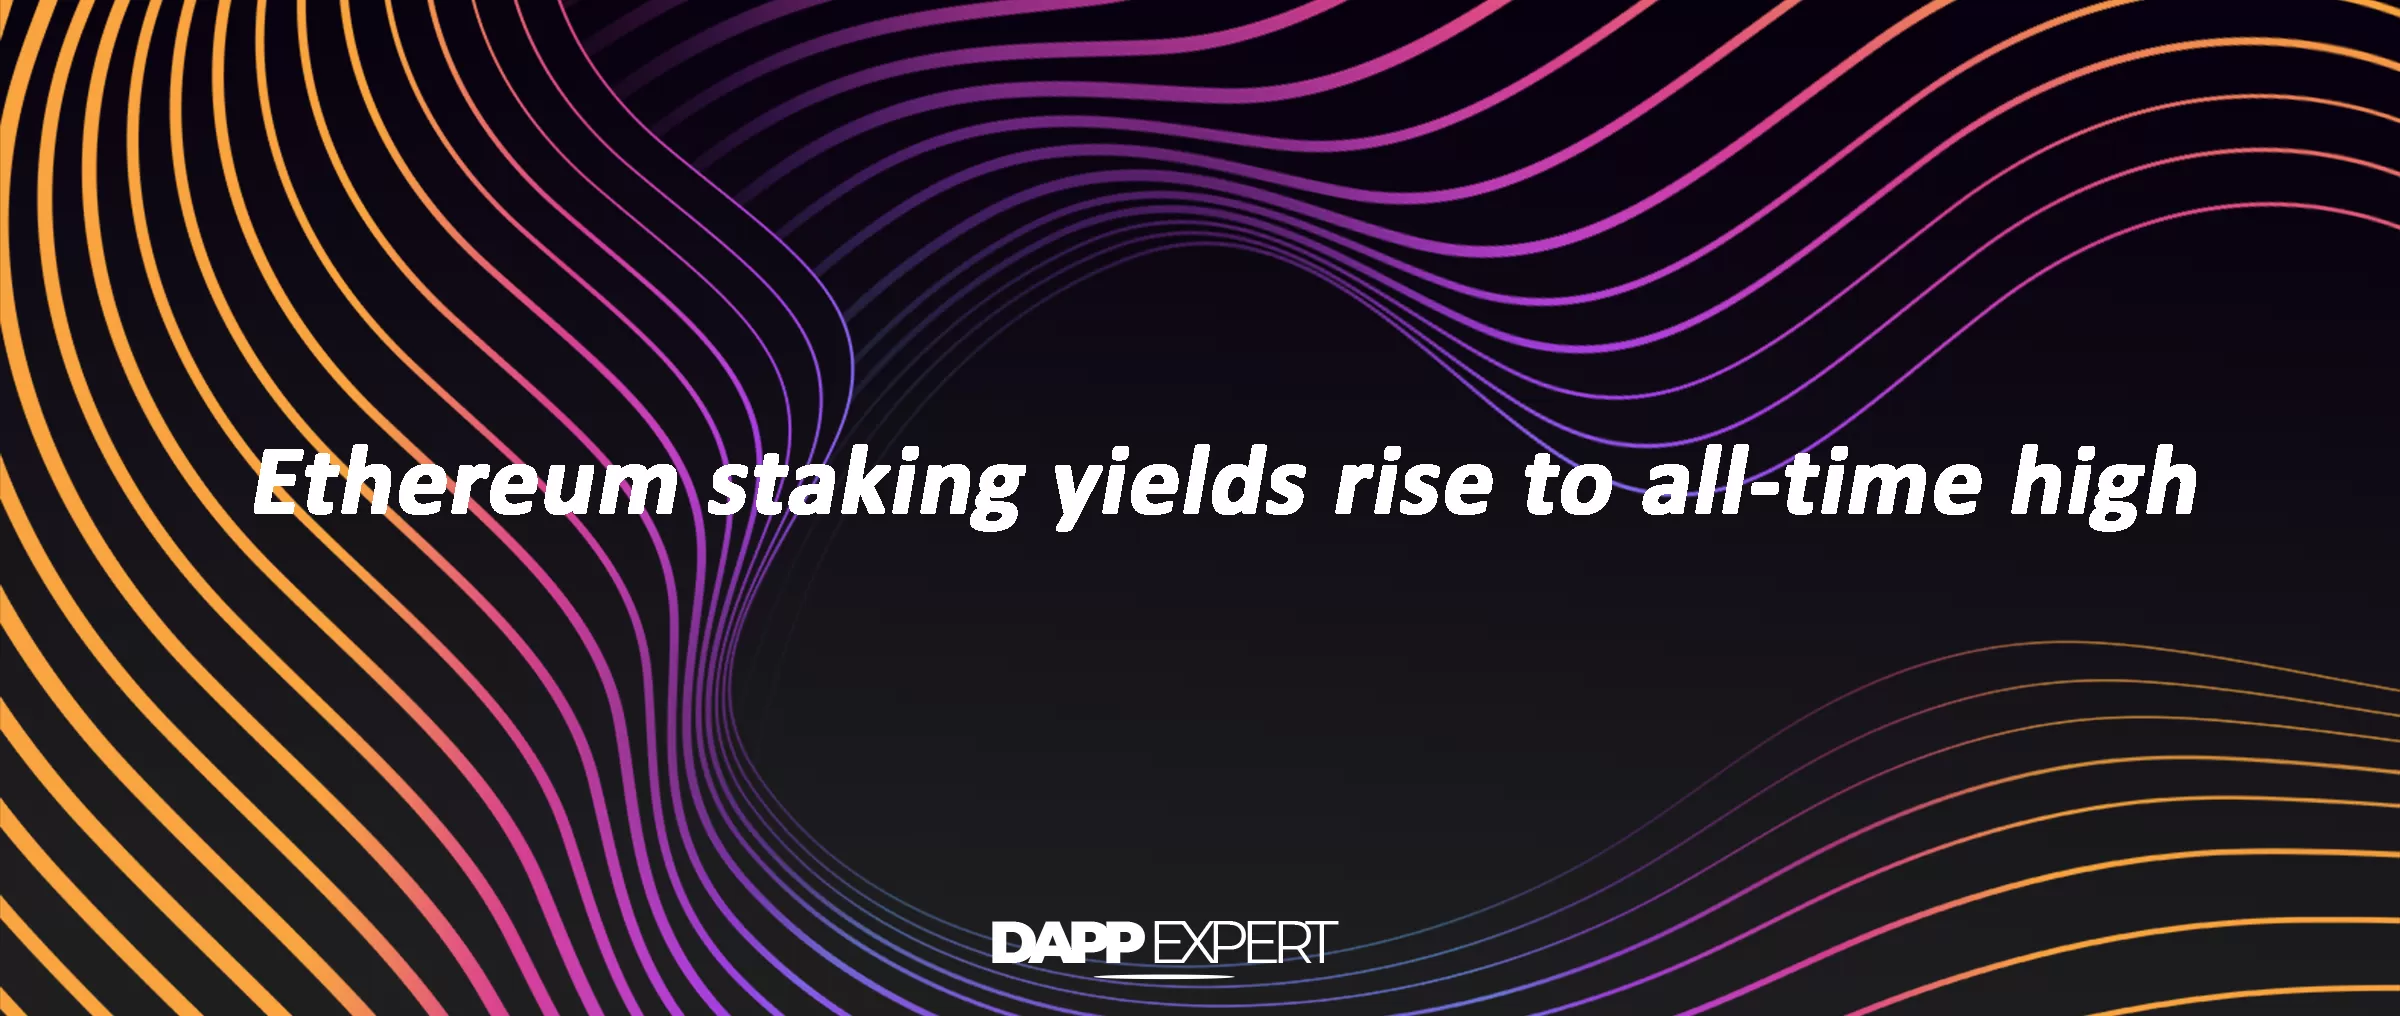 Ethereum staking yields rise to all-time high